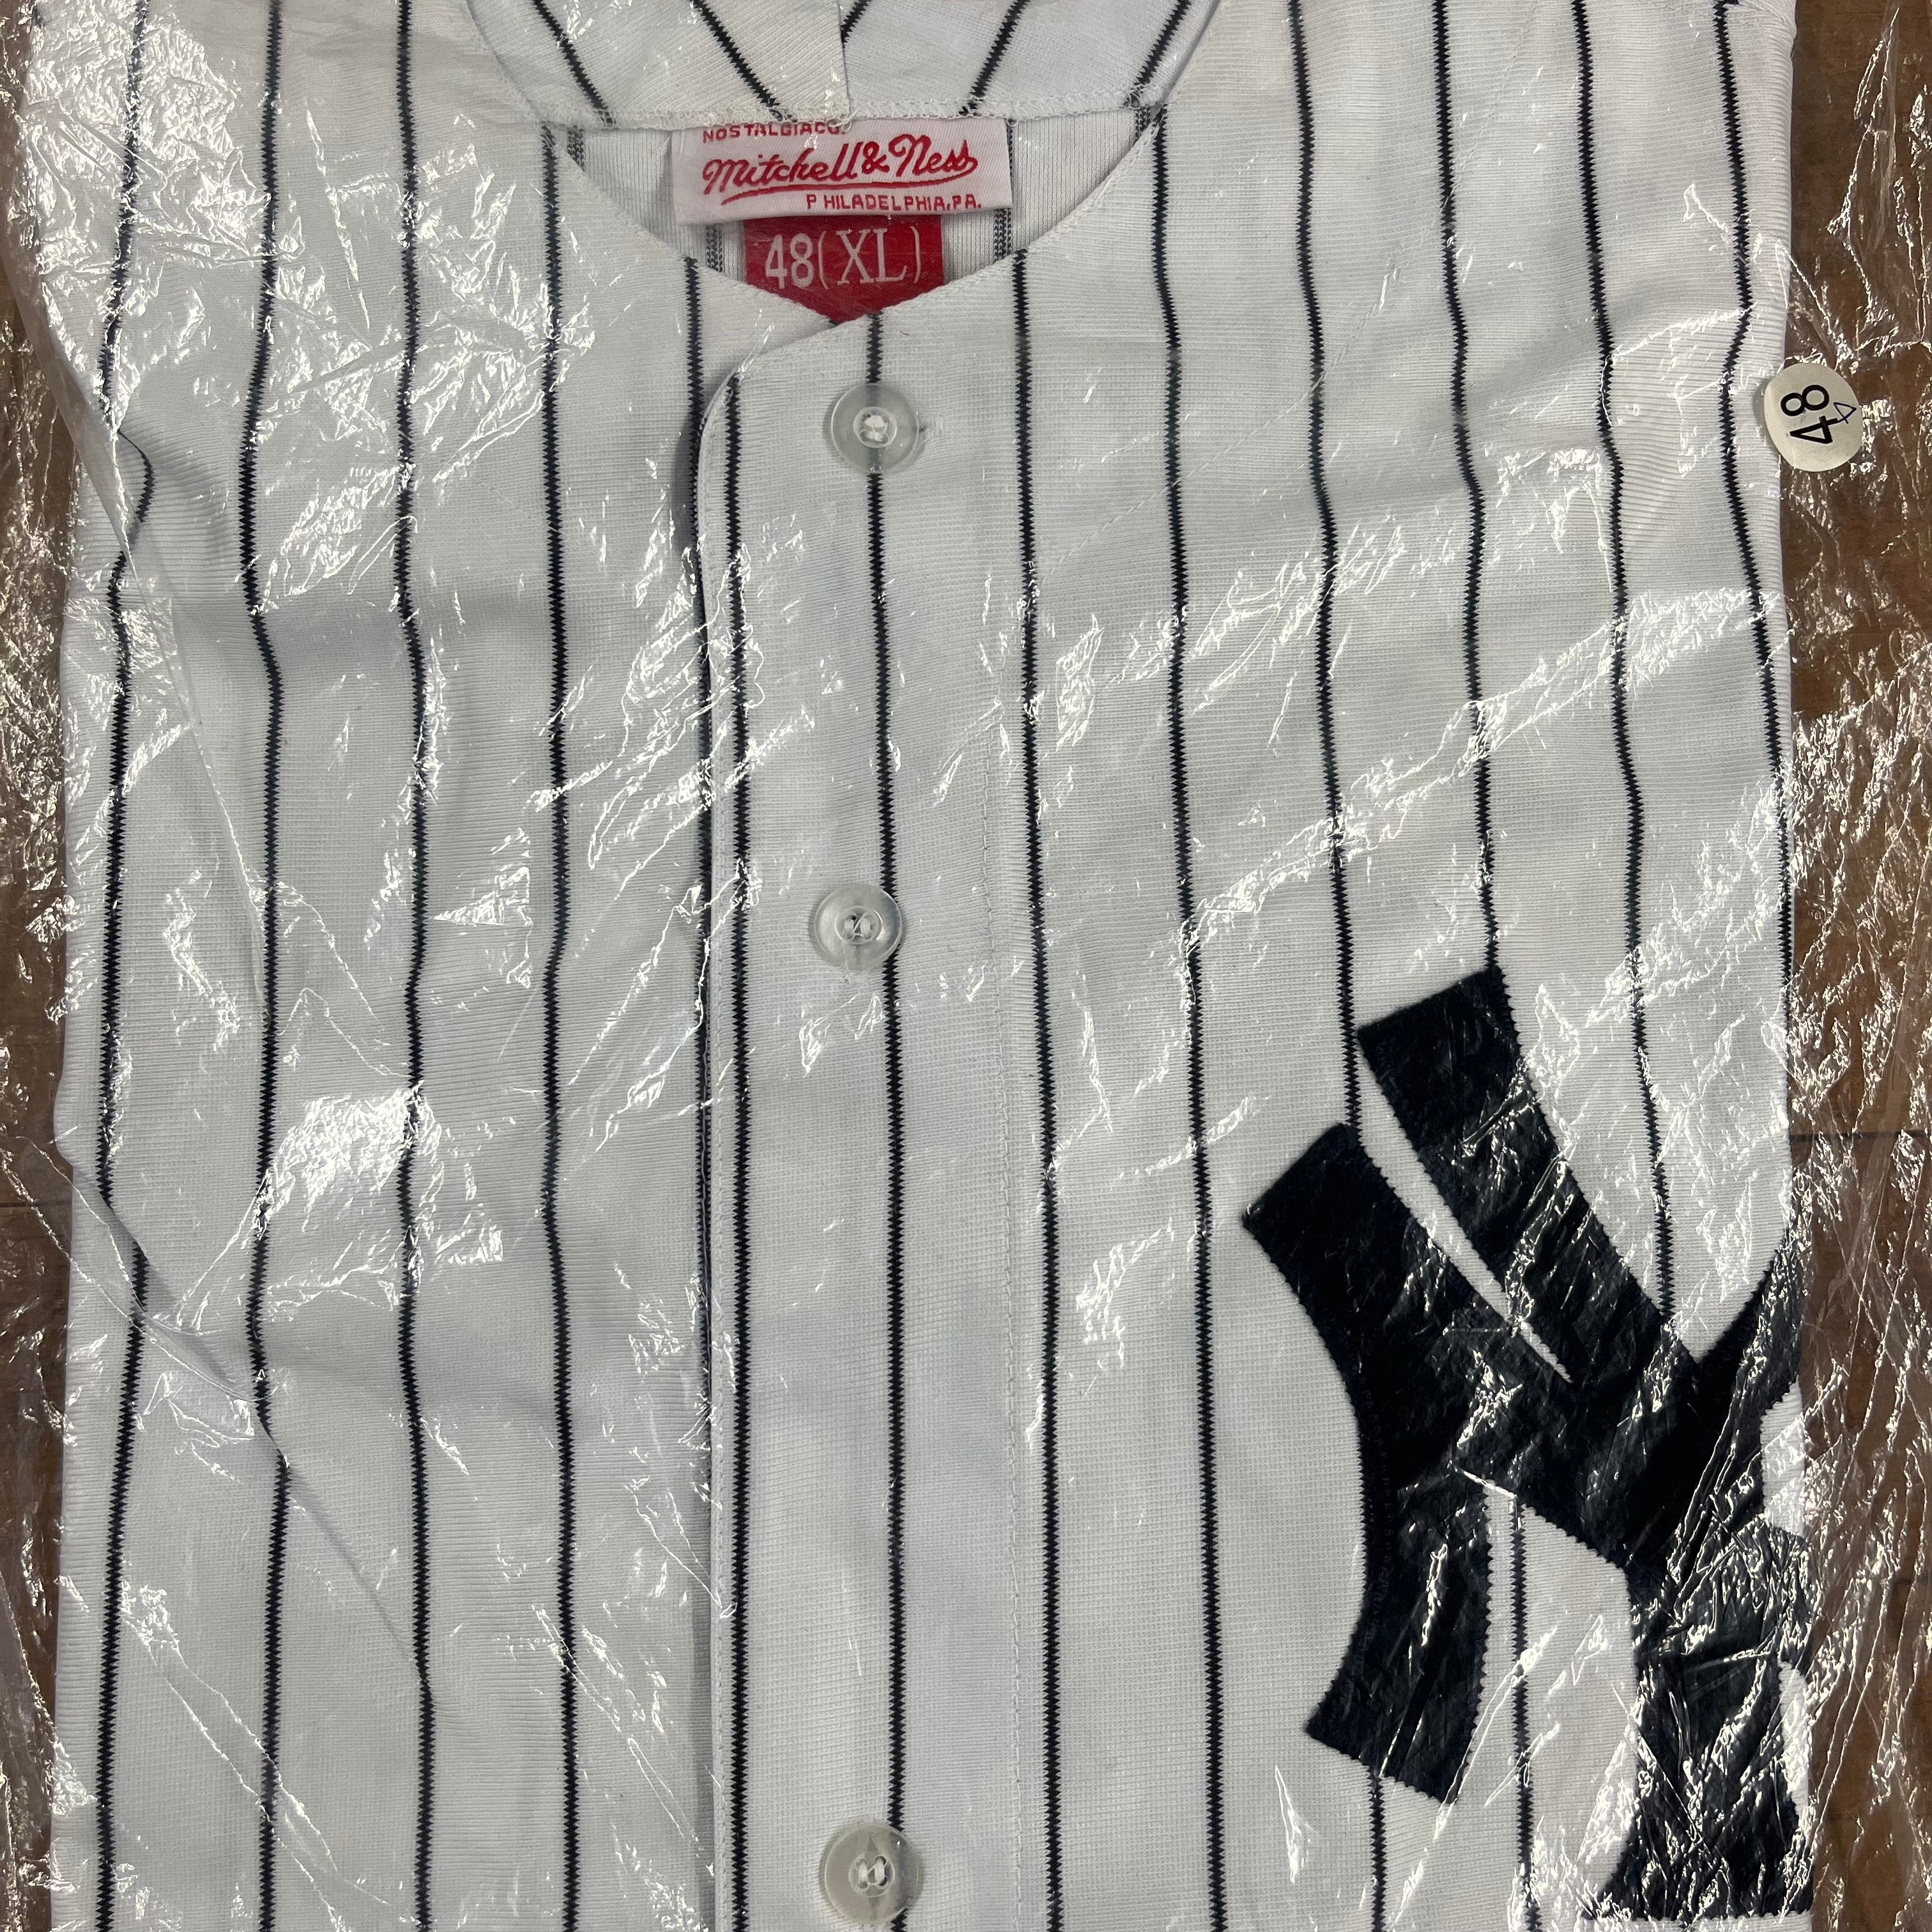 yankees mitchell and ness jersey